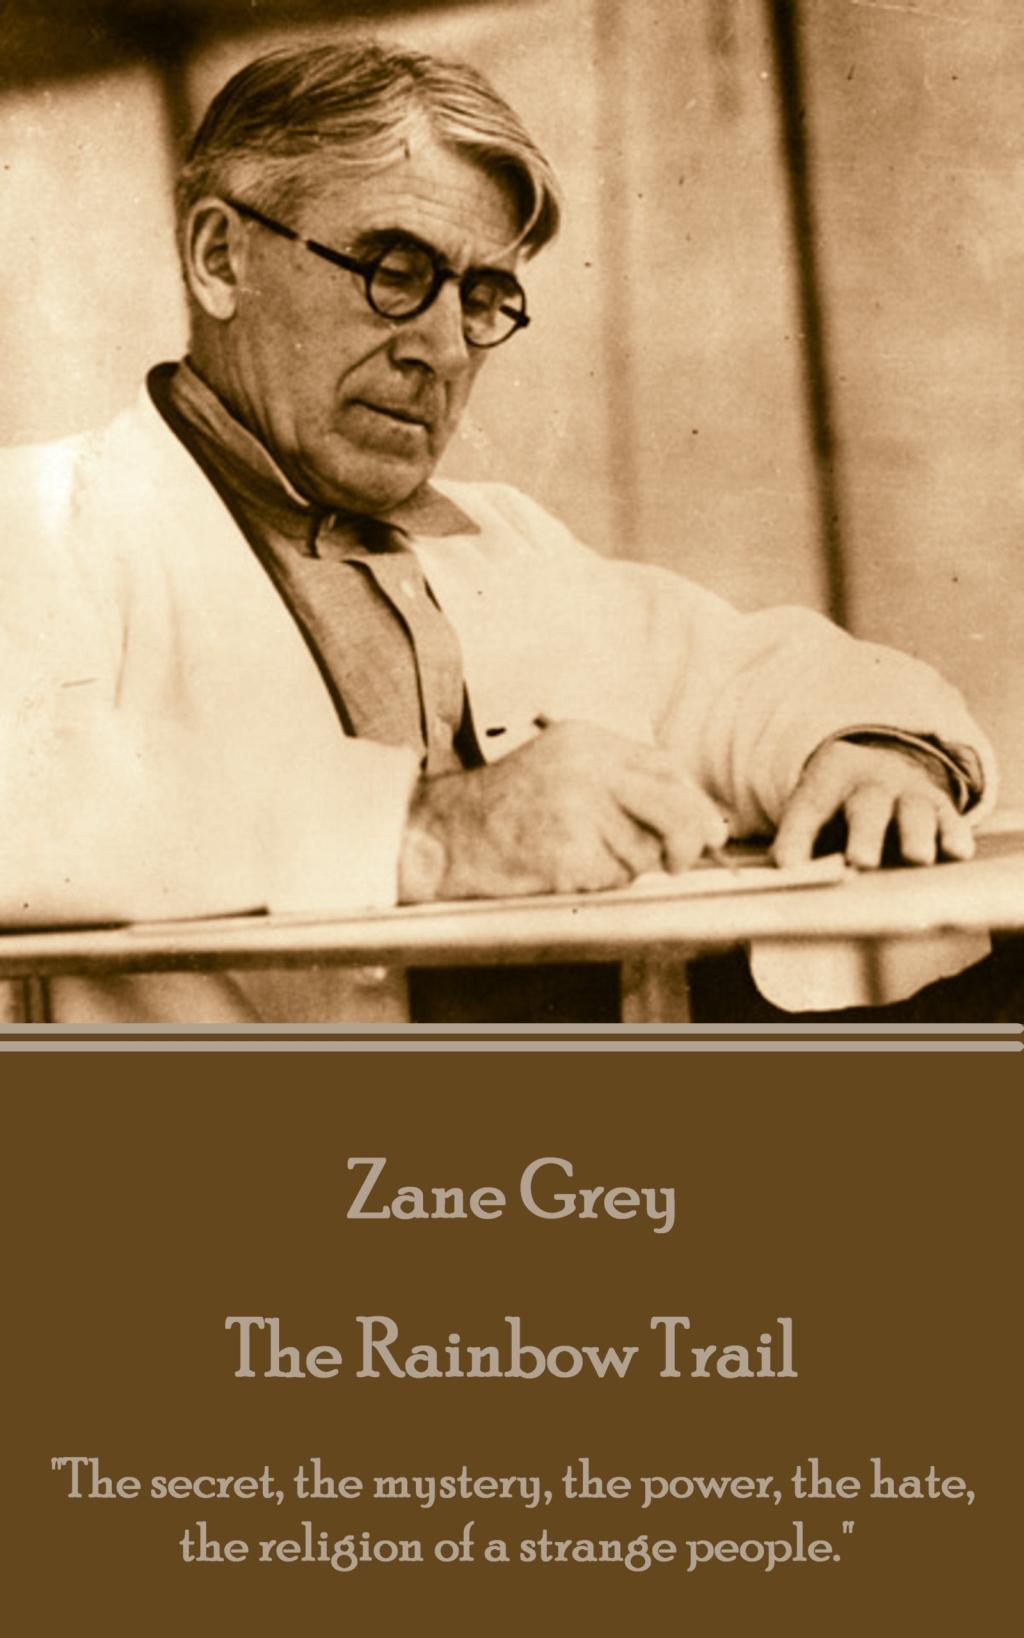 Zane Grey - The Rainbow Trail: \\ The secret, the mystery, the power, the hate, the religion of a strange people. - Grey, Zane